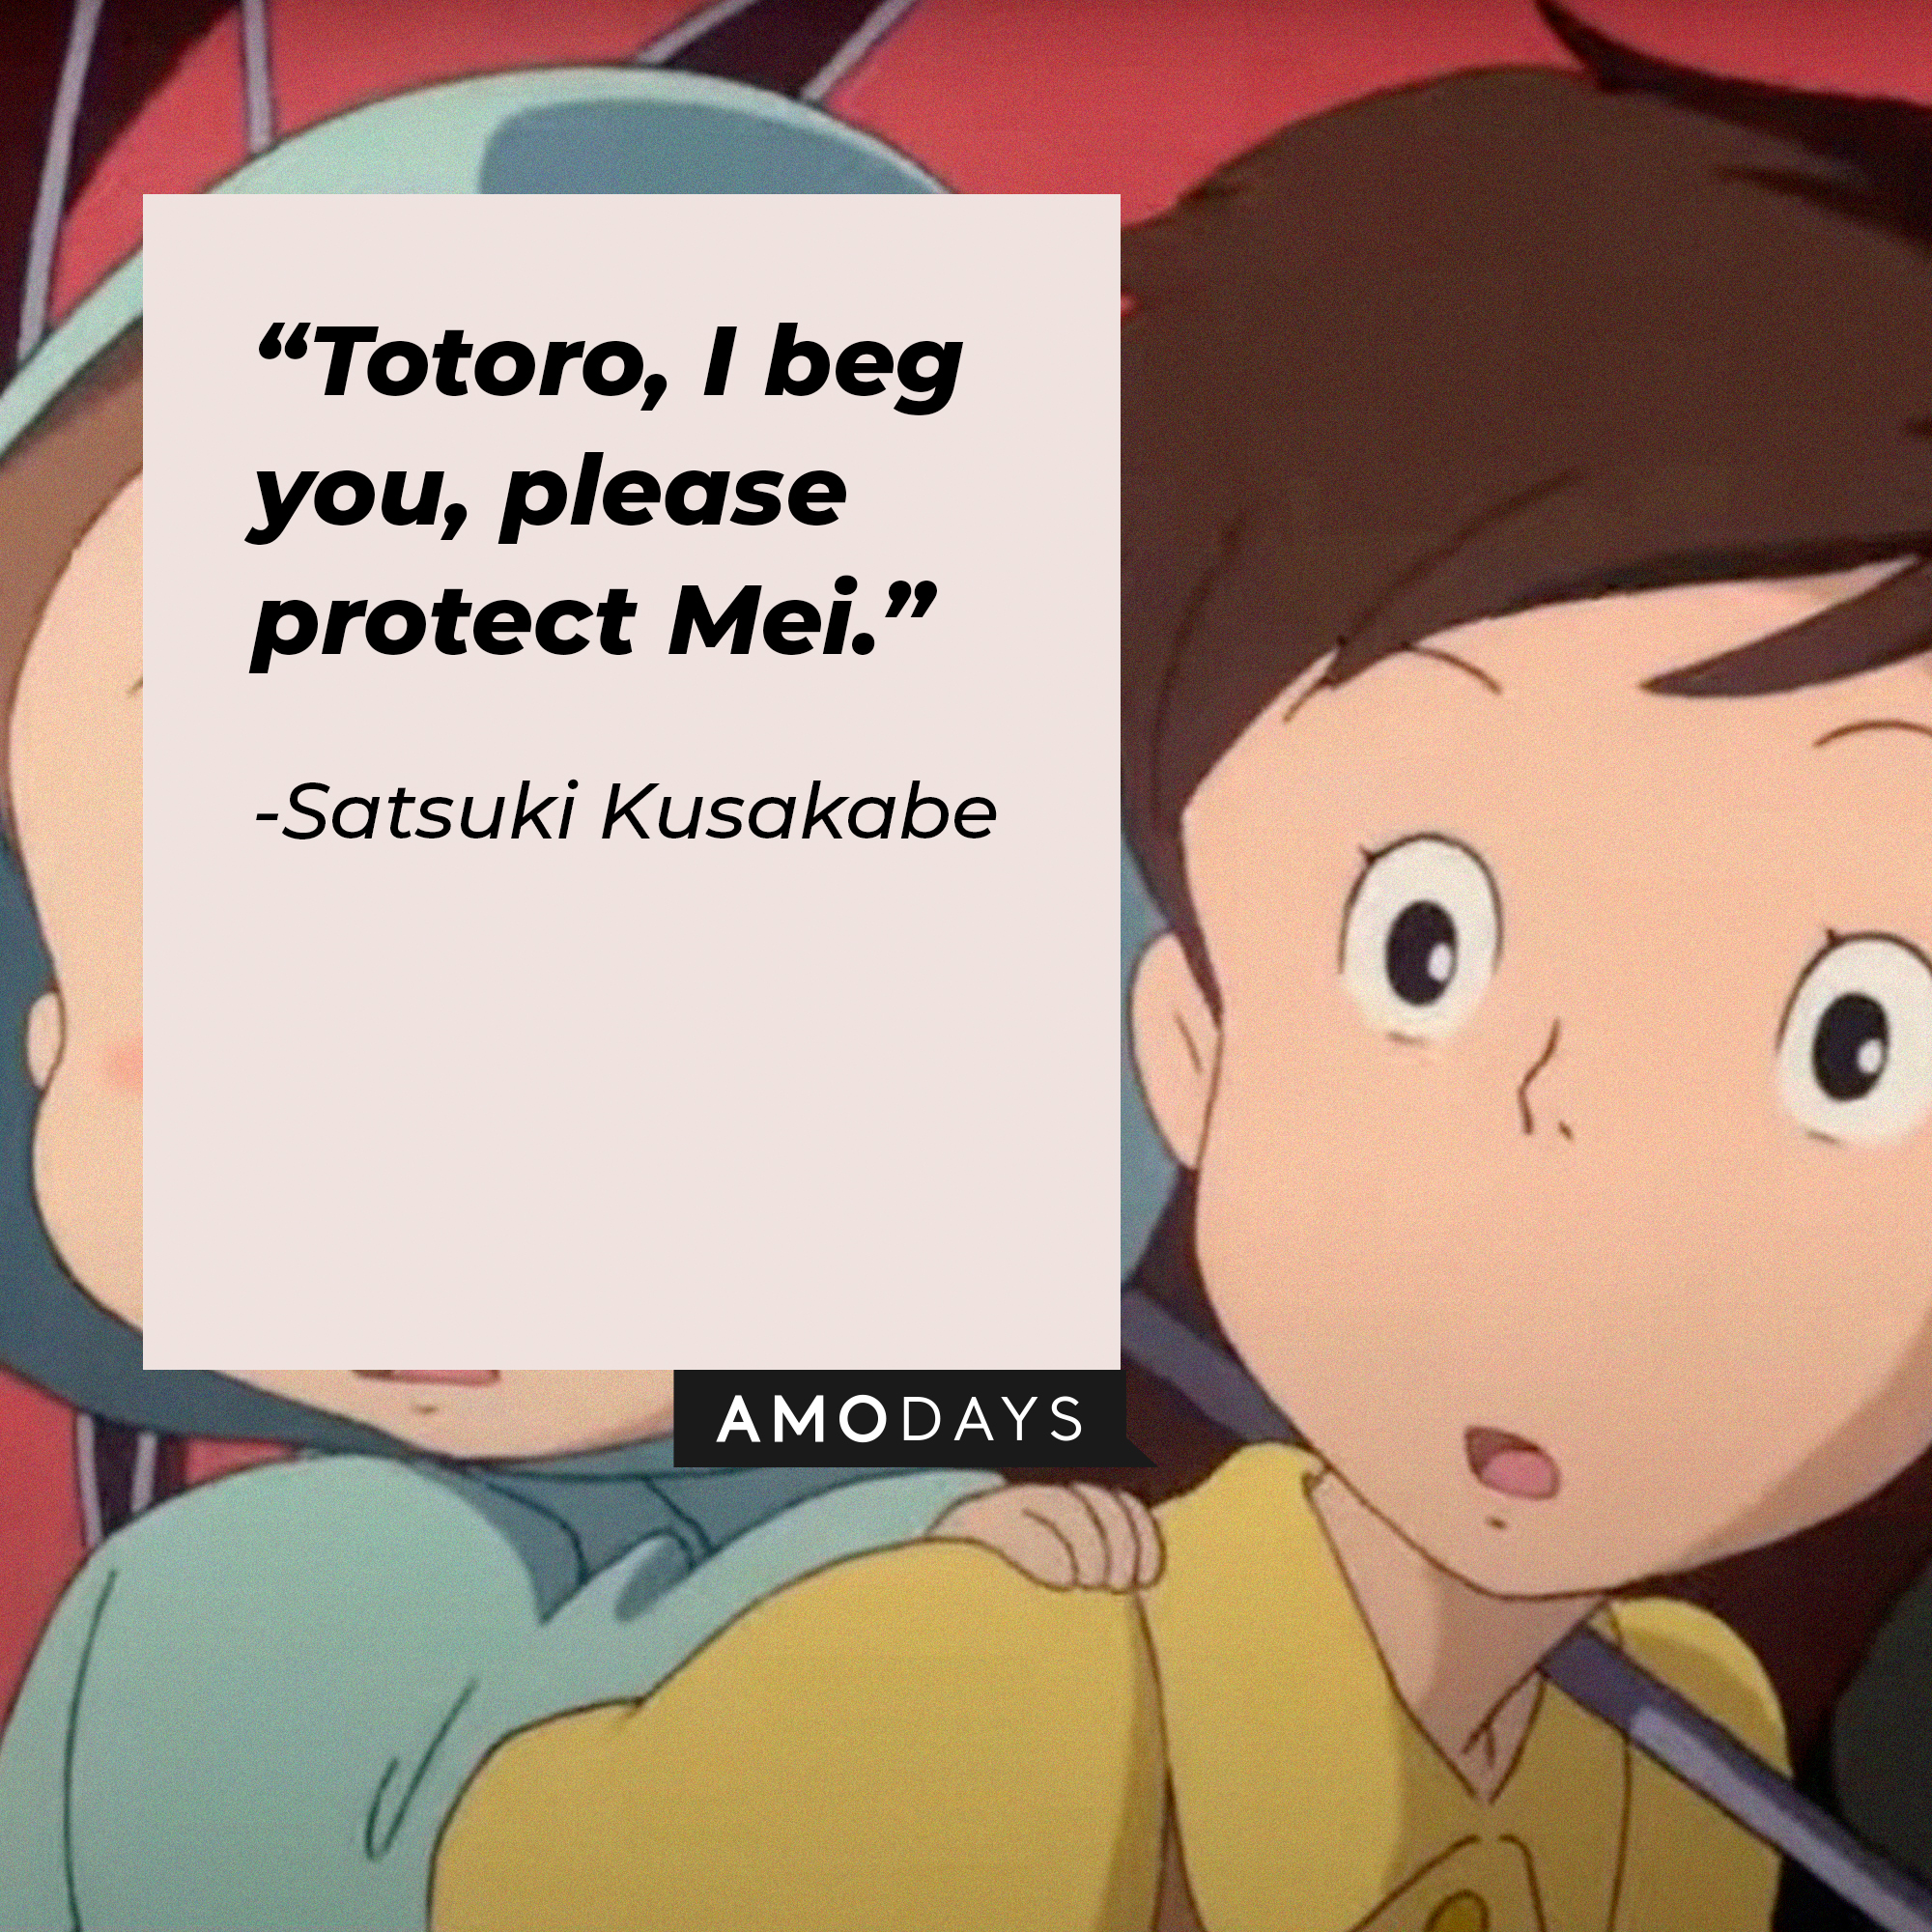 An image of Mei and Satsuki Kusakabe with Satsuki’s quote: “Totoro, I beg you, please protect Mei.” | Source: youtube.com/CrunchyrollCollection